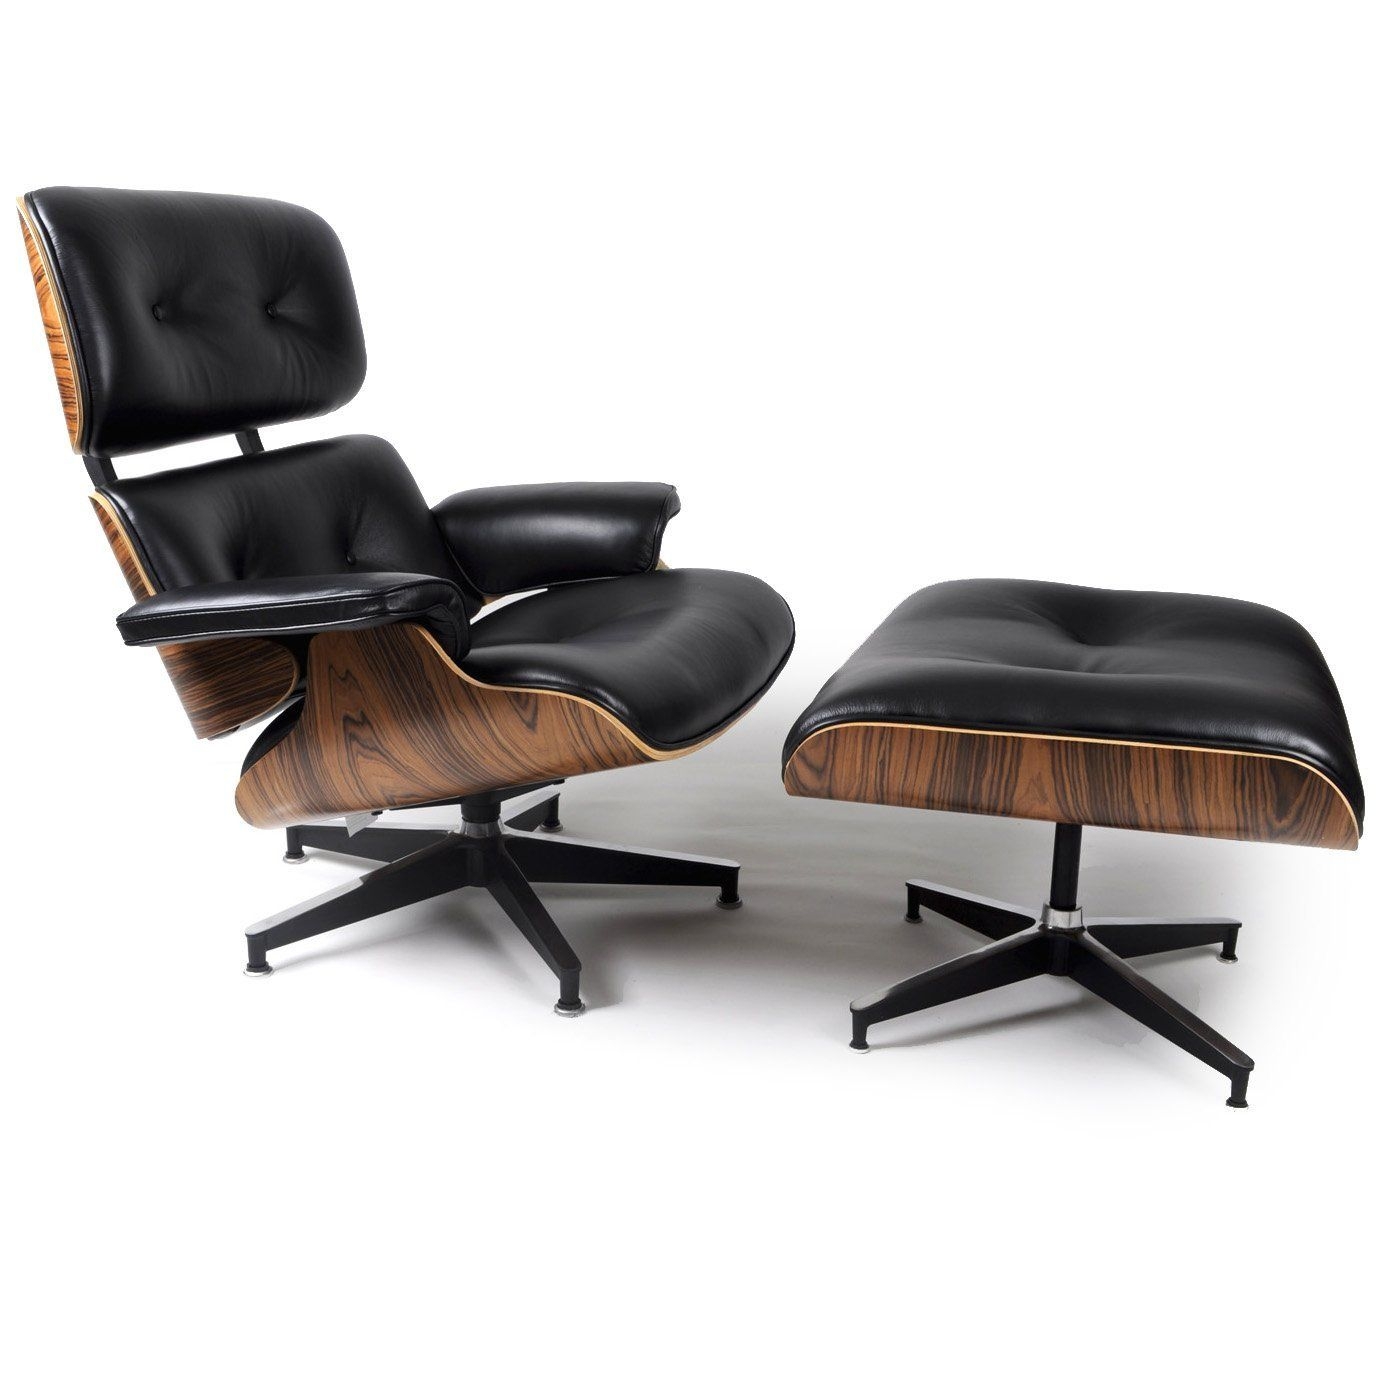 Mid Century Modern Classic Palisander Plywood Lounge Chair & Ottoman With Black Premium Top Grain Leather Eames Style Replica